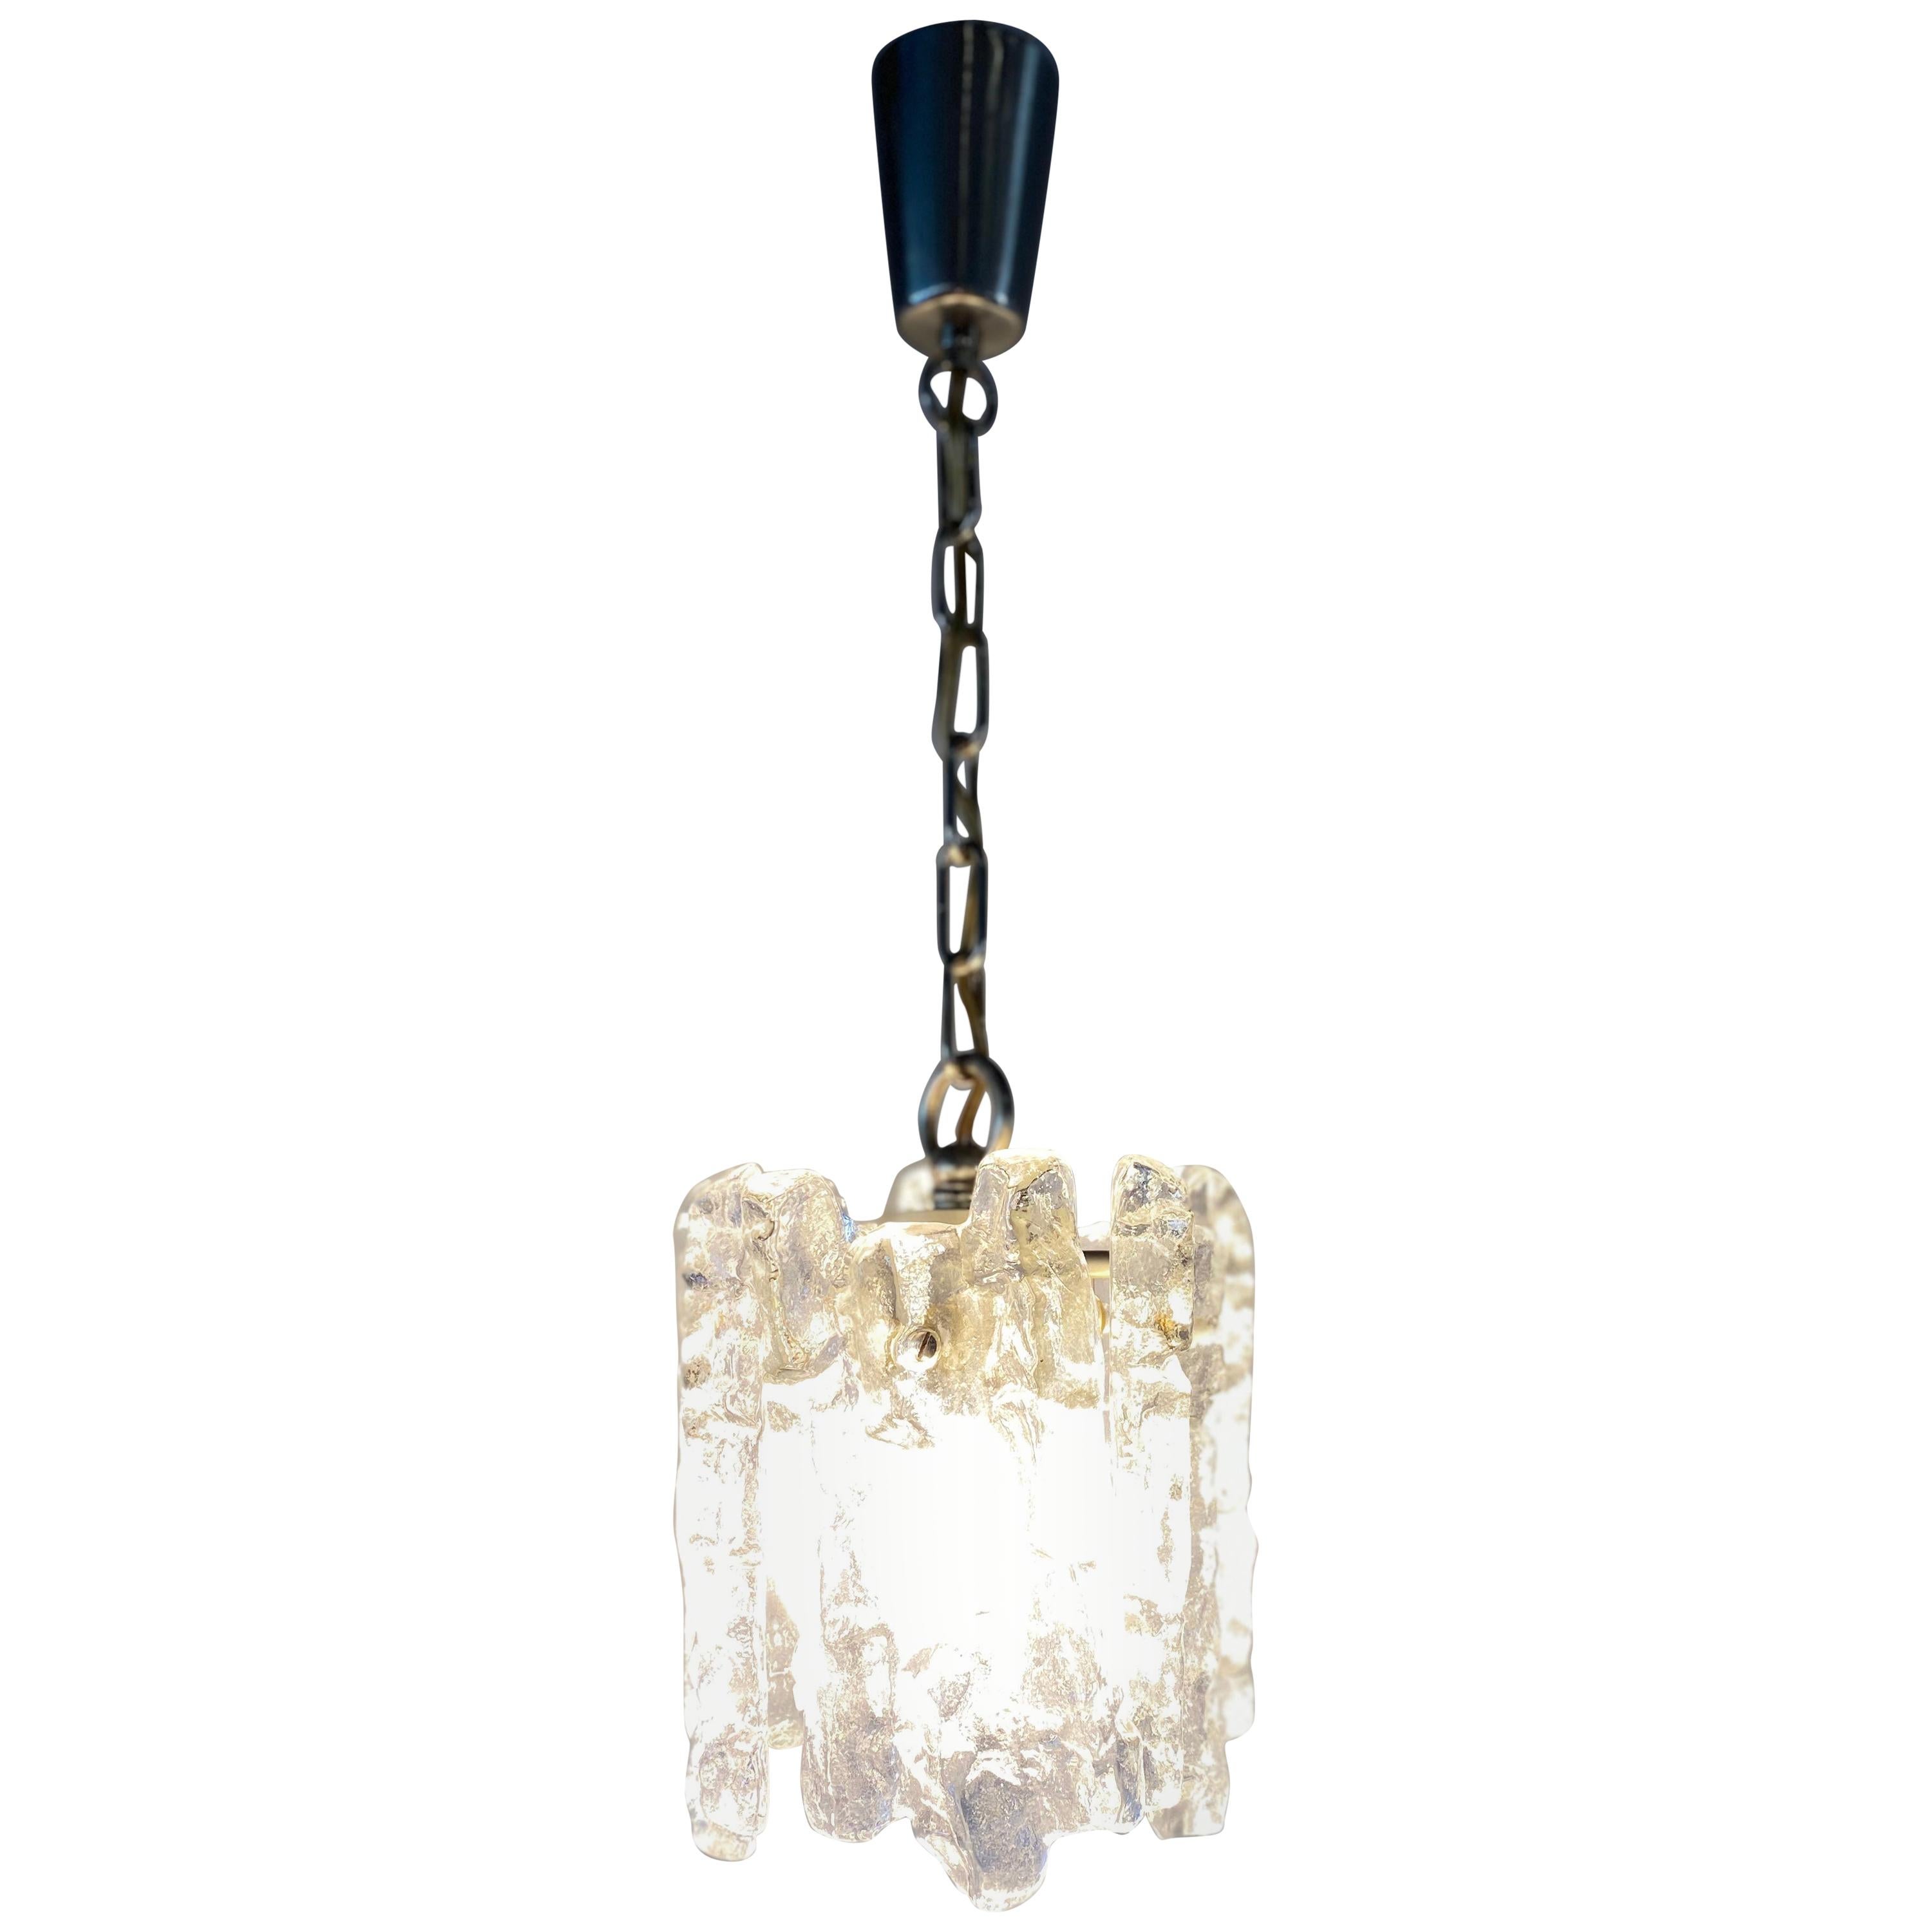 Small J.T. Kalmar 'Ice Glass' Chandelier, 1960s with One Lamp Socket